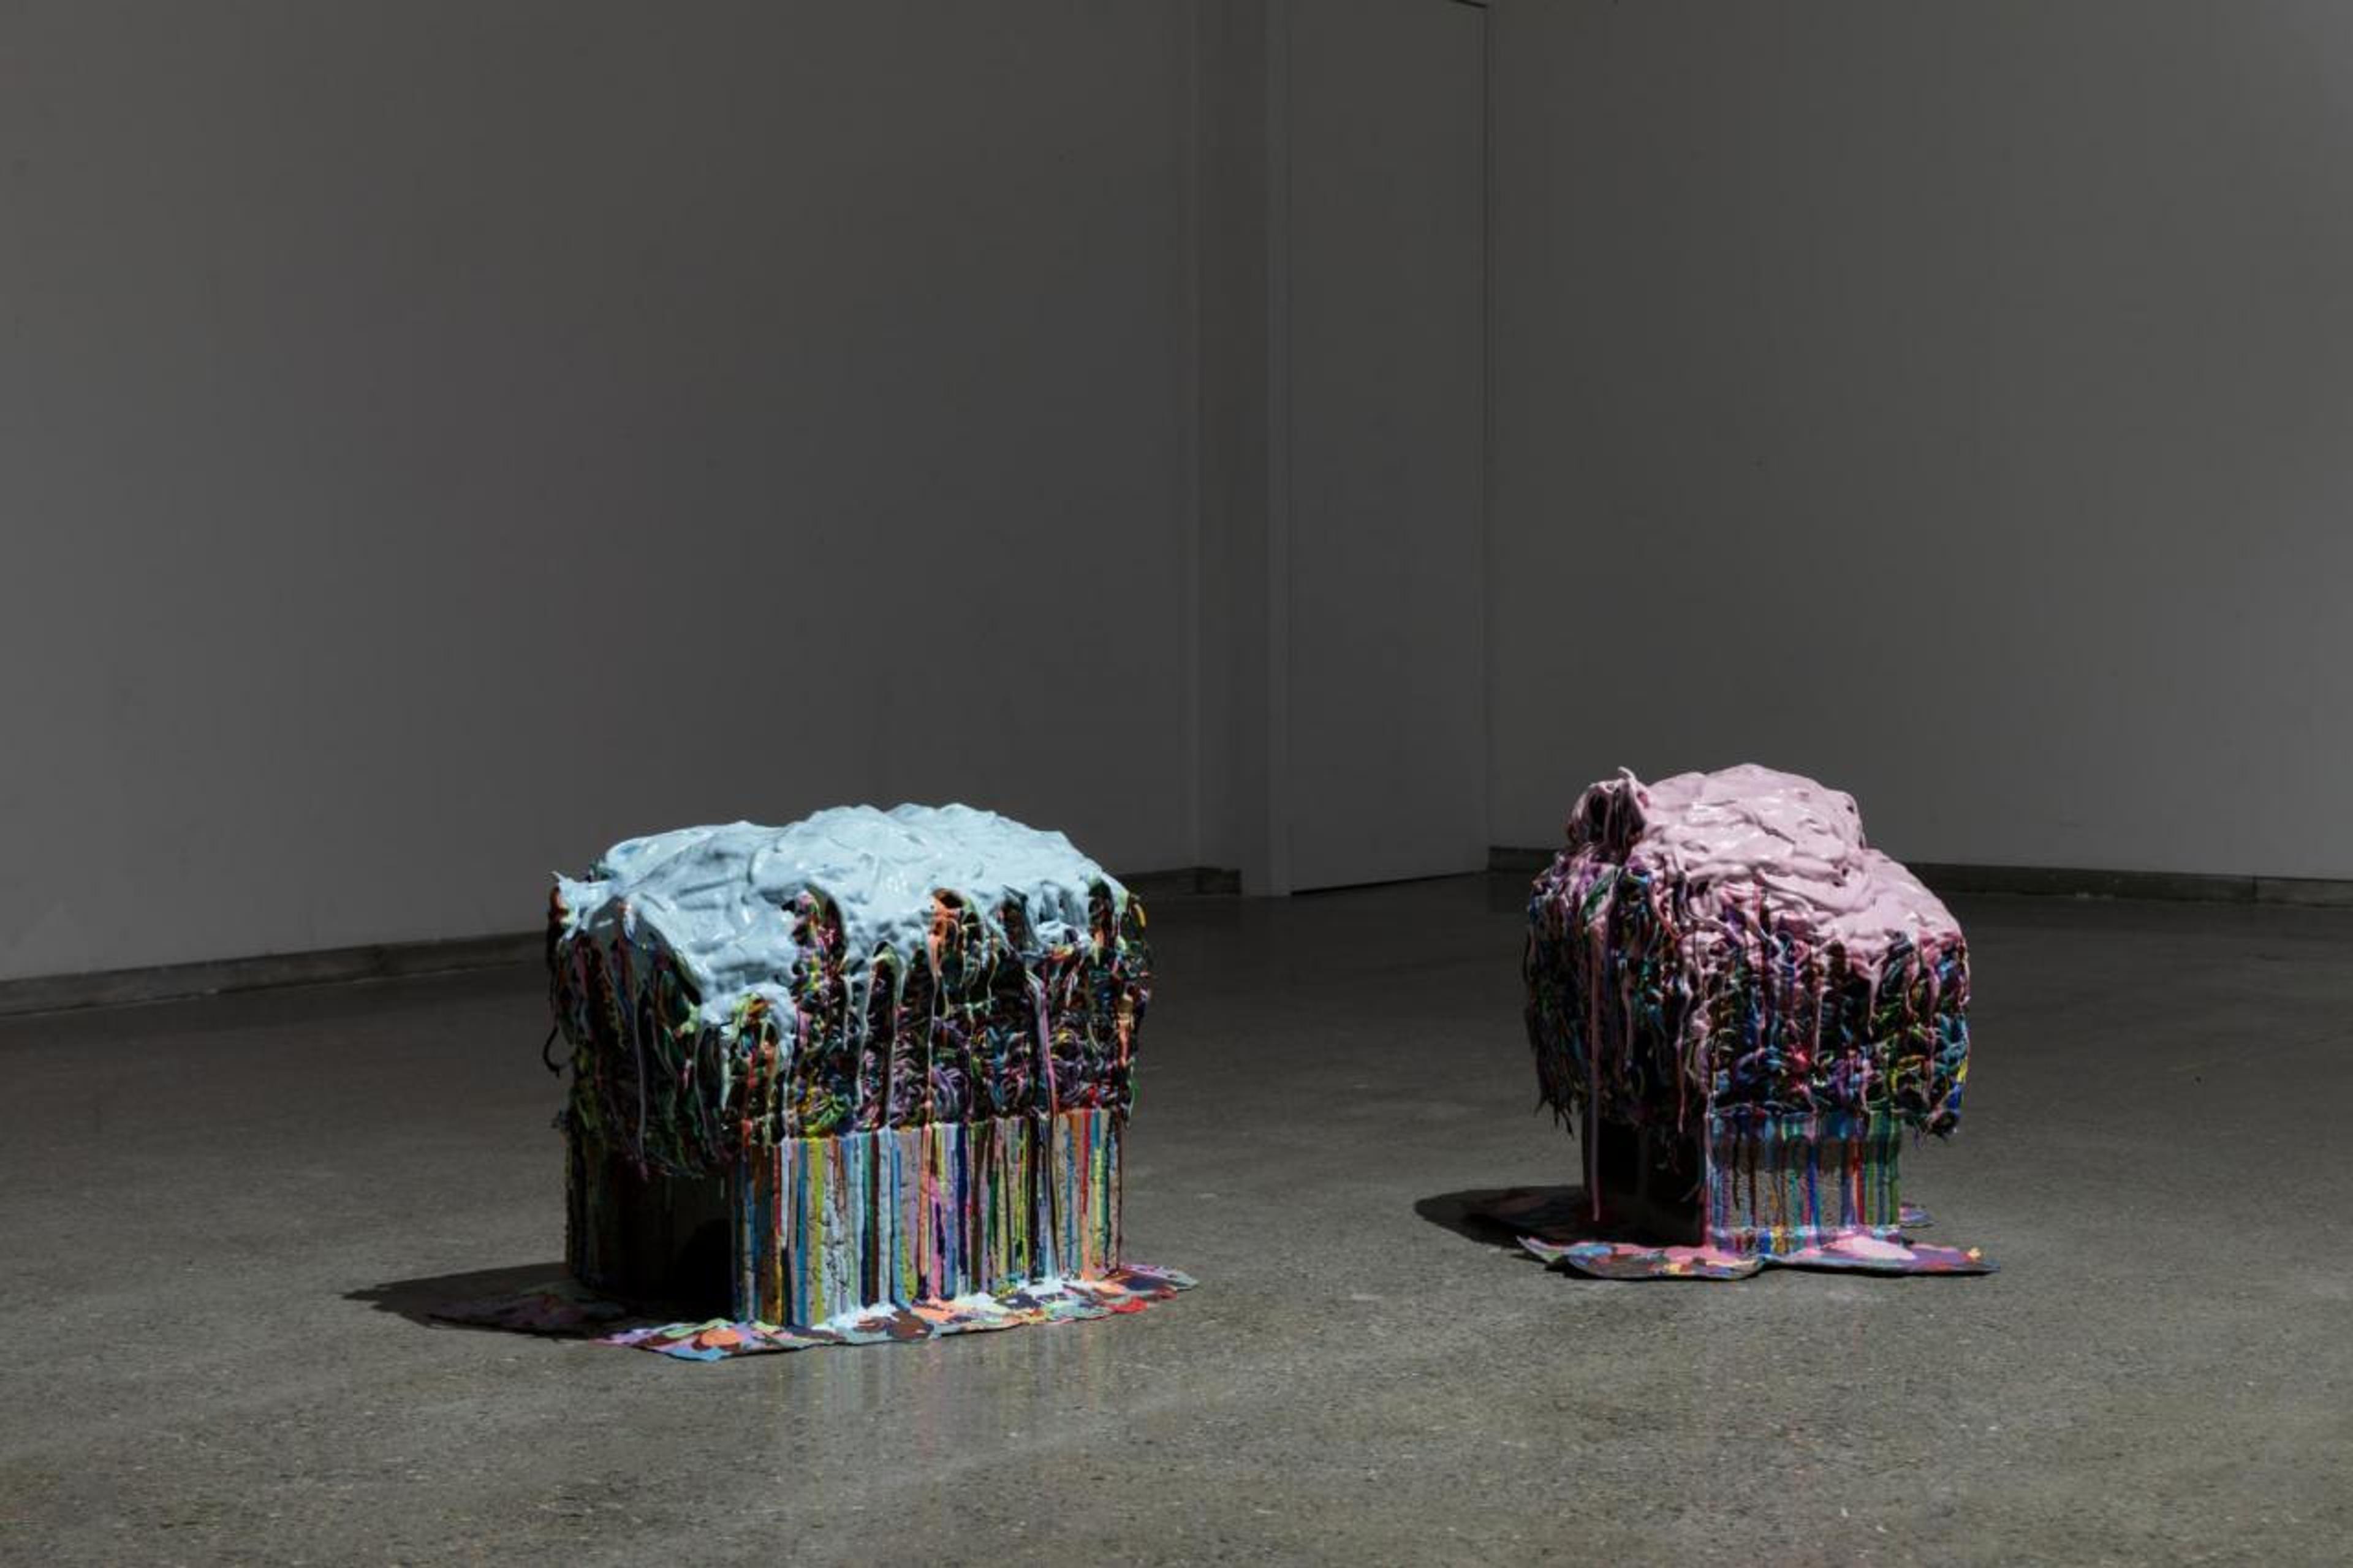 Ju Ting, Coral 102121 (left) and Coral 102021 (right), 2021, acrylic, cinder block, 47 &times; 64 &times; 50 cm and 45 &times; 50 &times; 50 cm. Installation View, GWBJ 2022 &ldquo;Crosstalk,&rdquo; 2022, Beijing. Courtesy: Gallery Weekend Beijing